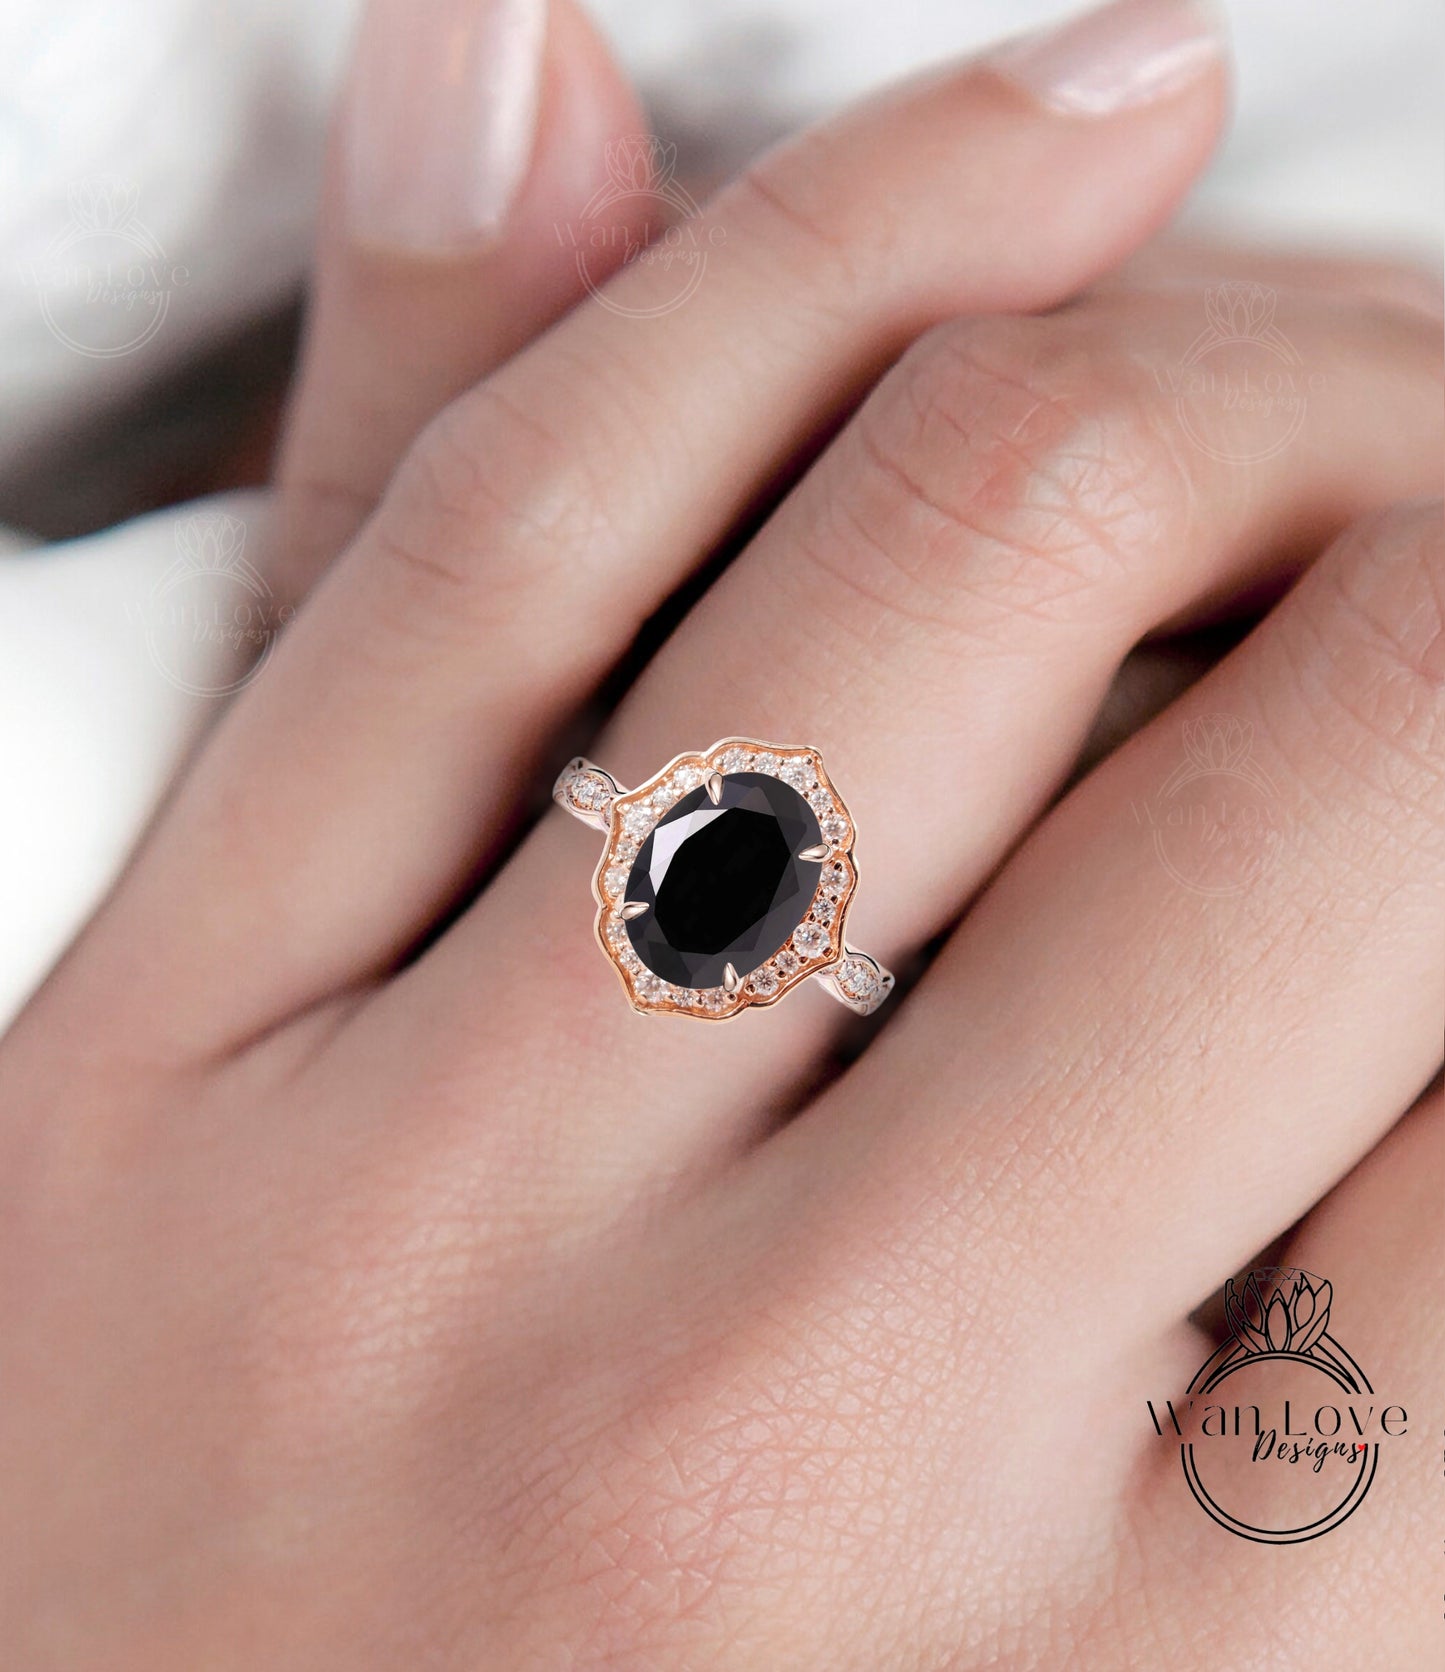 Oval shape Black Spinel engagement ring diamond halo ring moissanite scalloped ring unique ring vintage ring rose gold ring anniversary ring